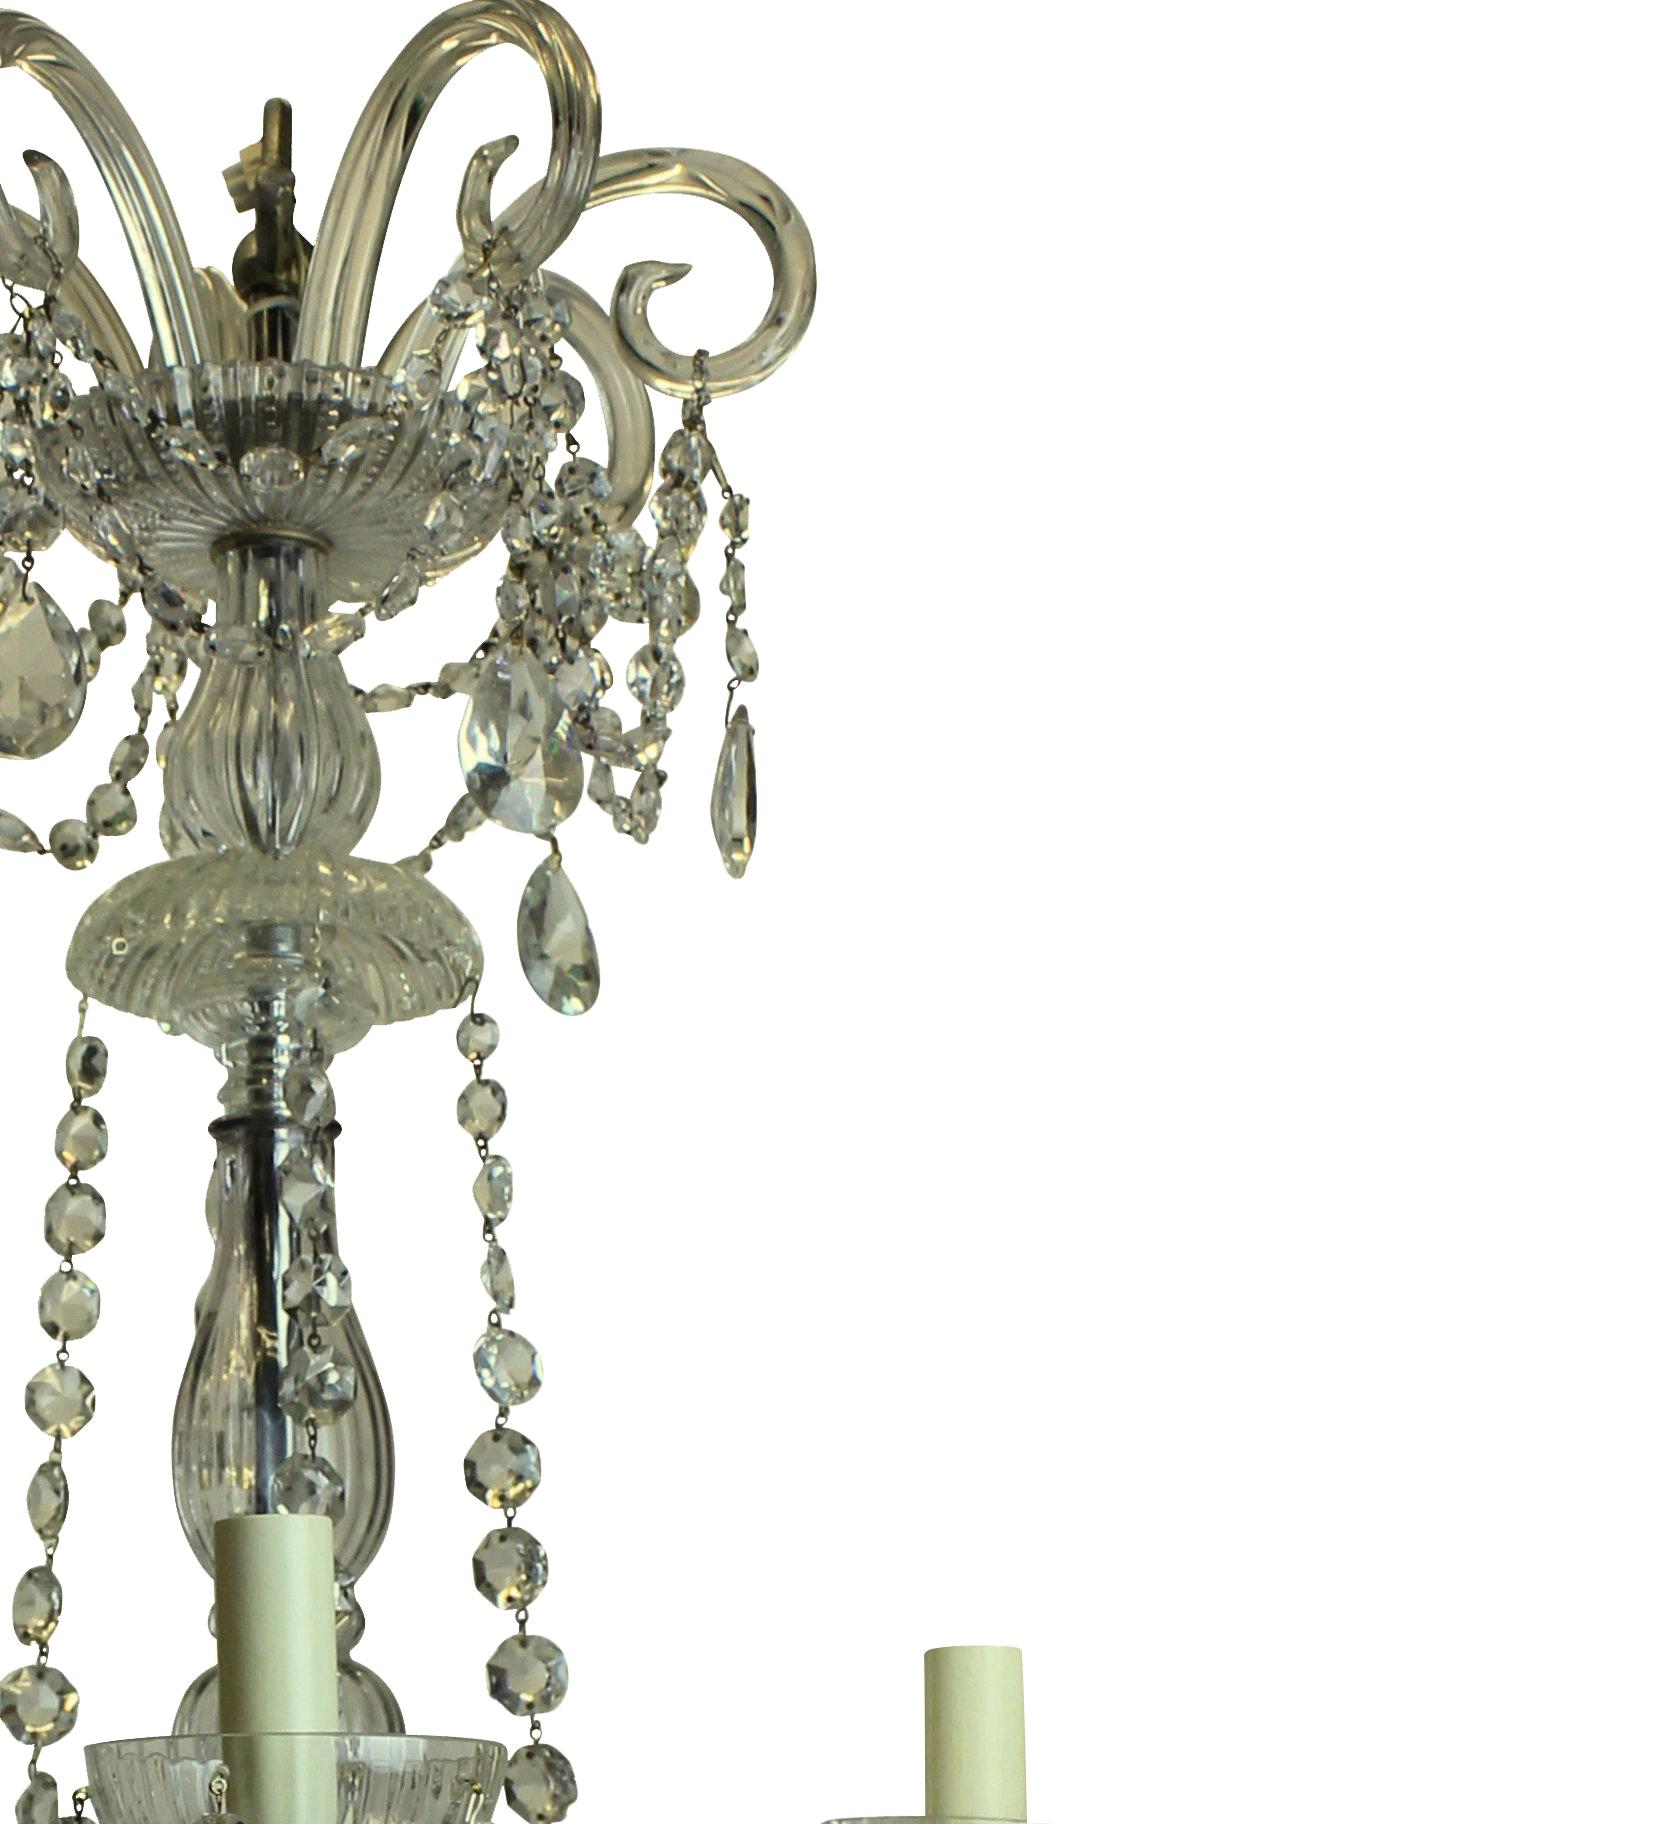 A French cut-glass chandelier of good proportions, with scrolls and swags.